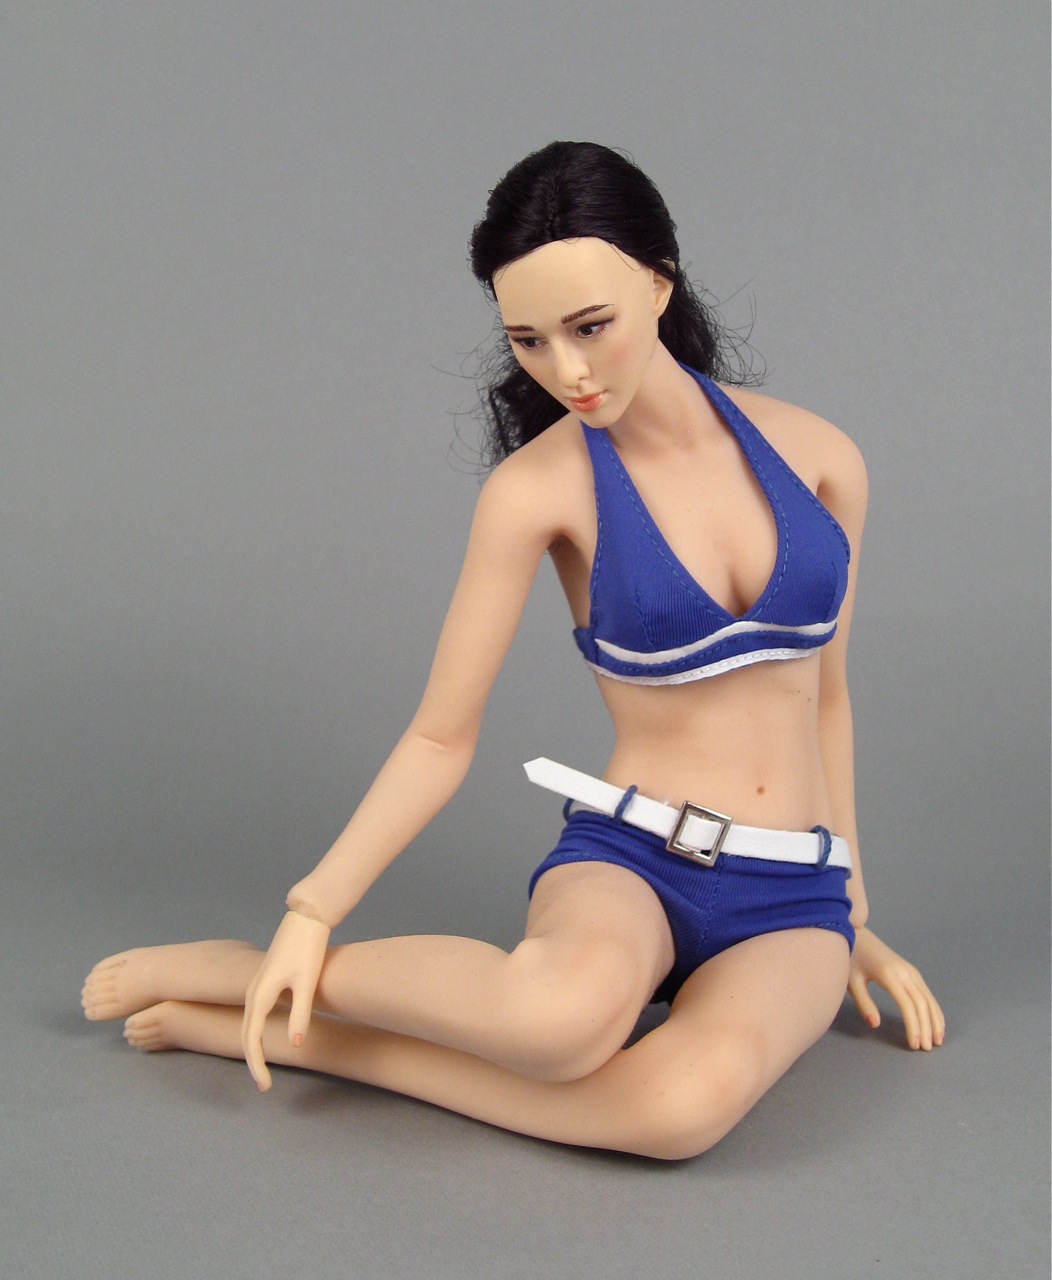 Flexible 1/6 Female Body M Bust Breast for 12" Hot Toys Figure Phicen Verycool